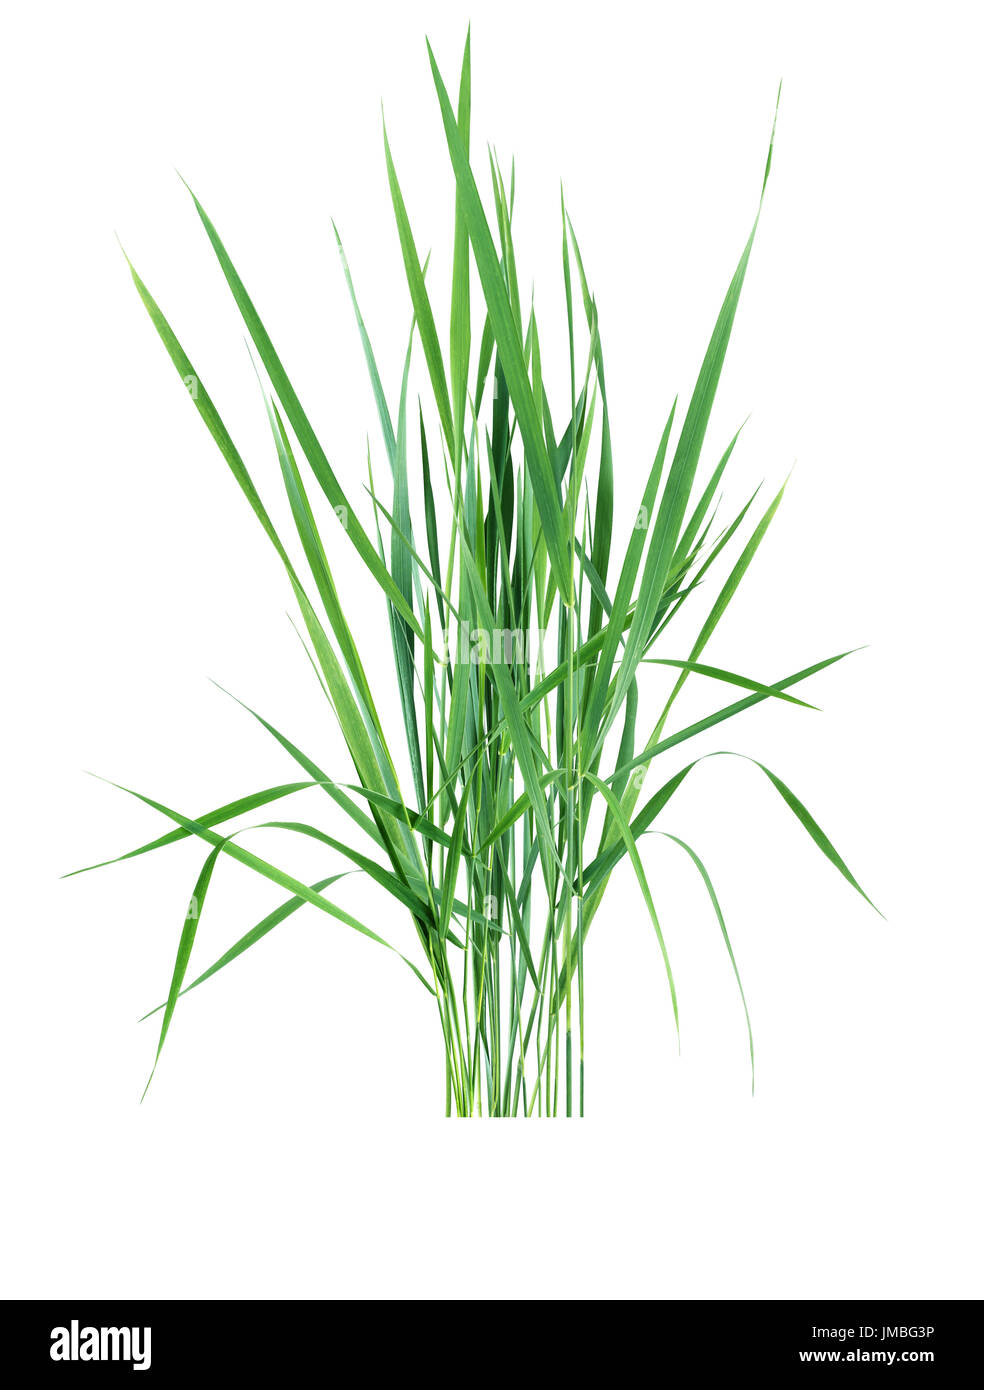 Bunch of ordinary freshness green grass on white background Stock Photo